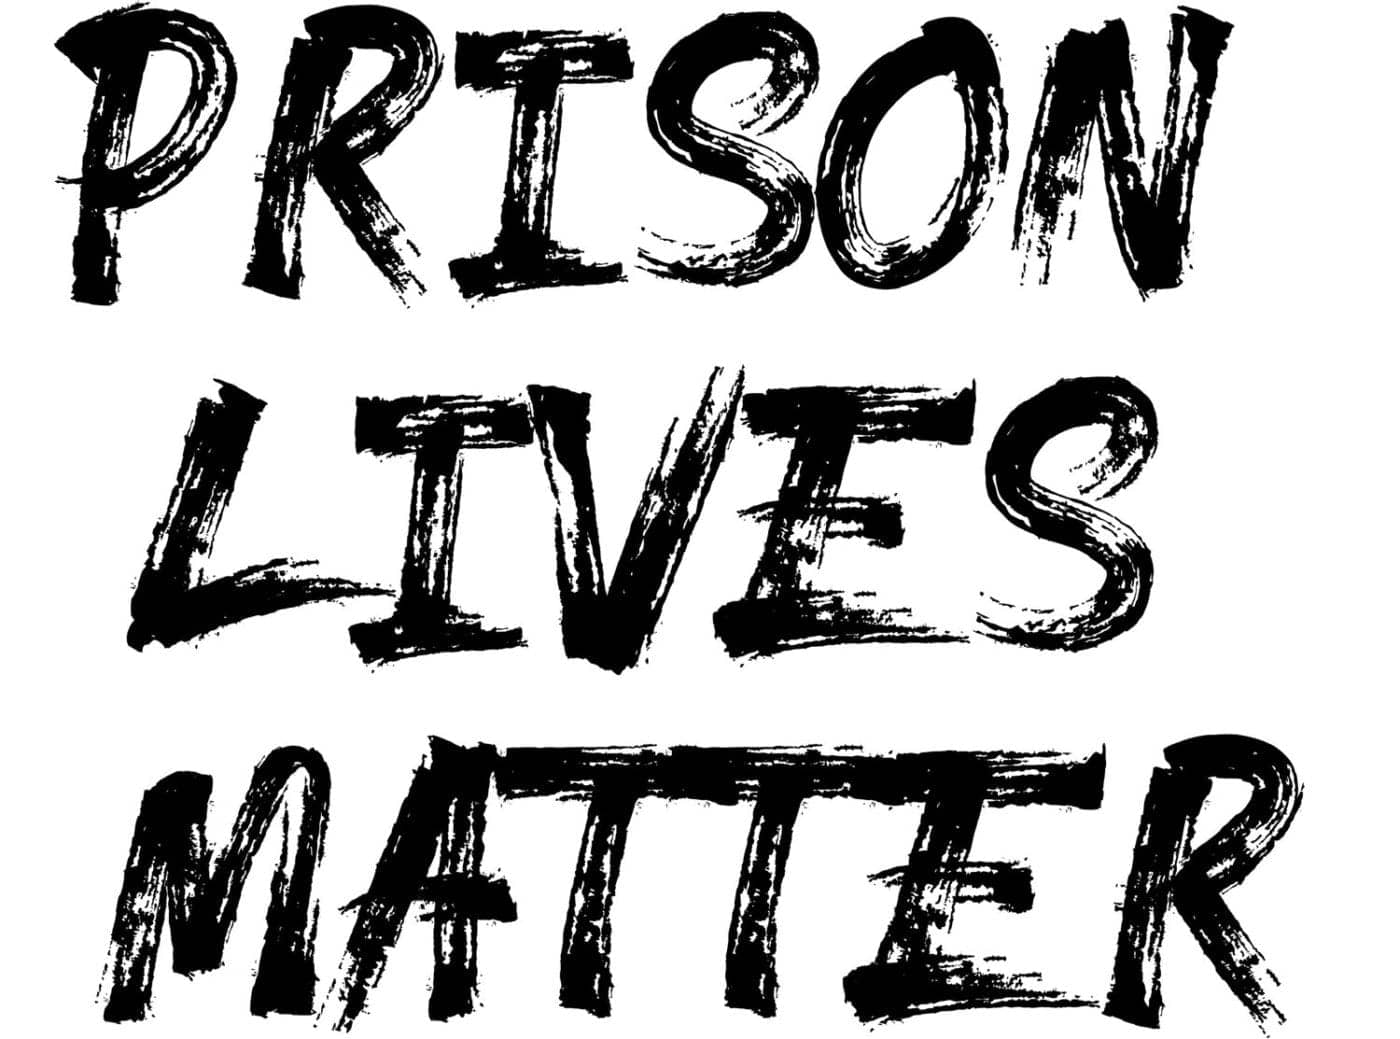 Prison-Lives-Matter-logo-1-1400x1039, <strong>Continuing our cry of genocide</strong>, Abolition Now! 